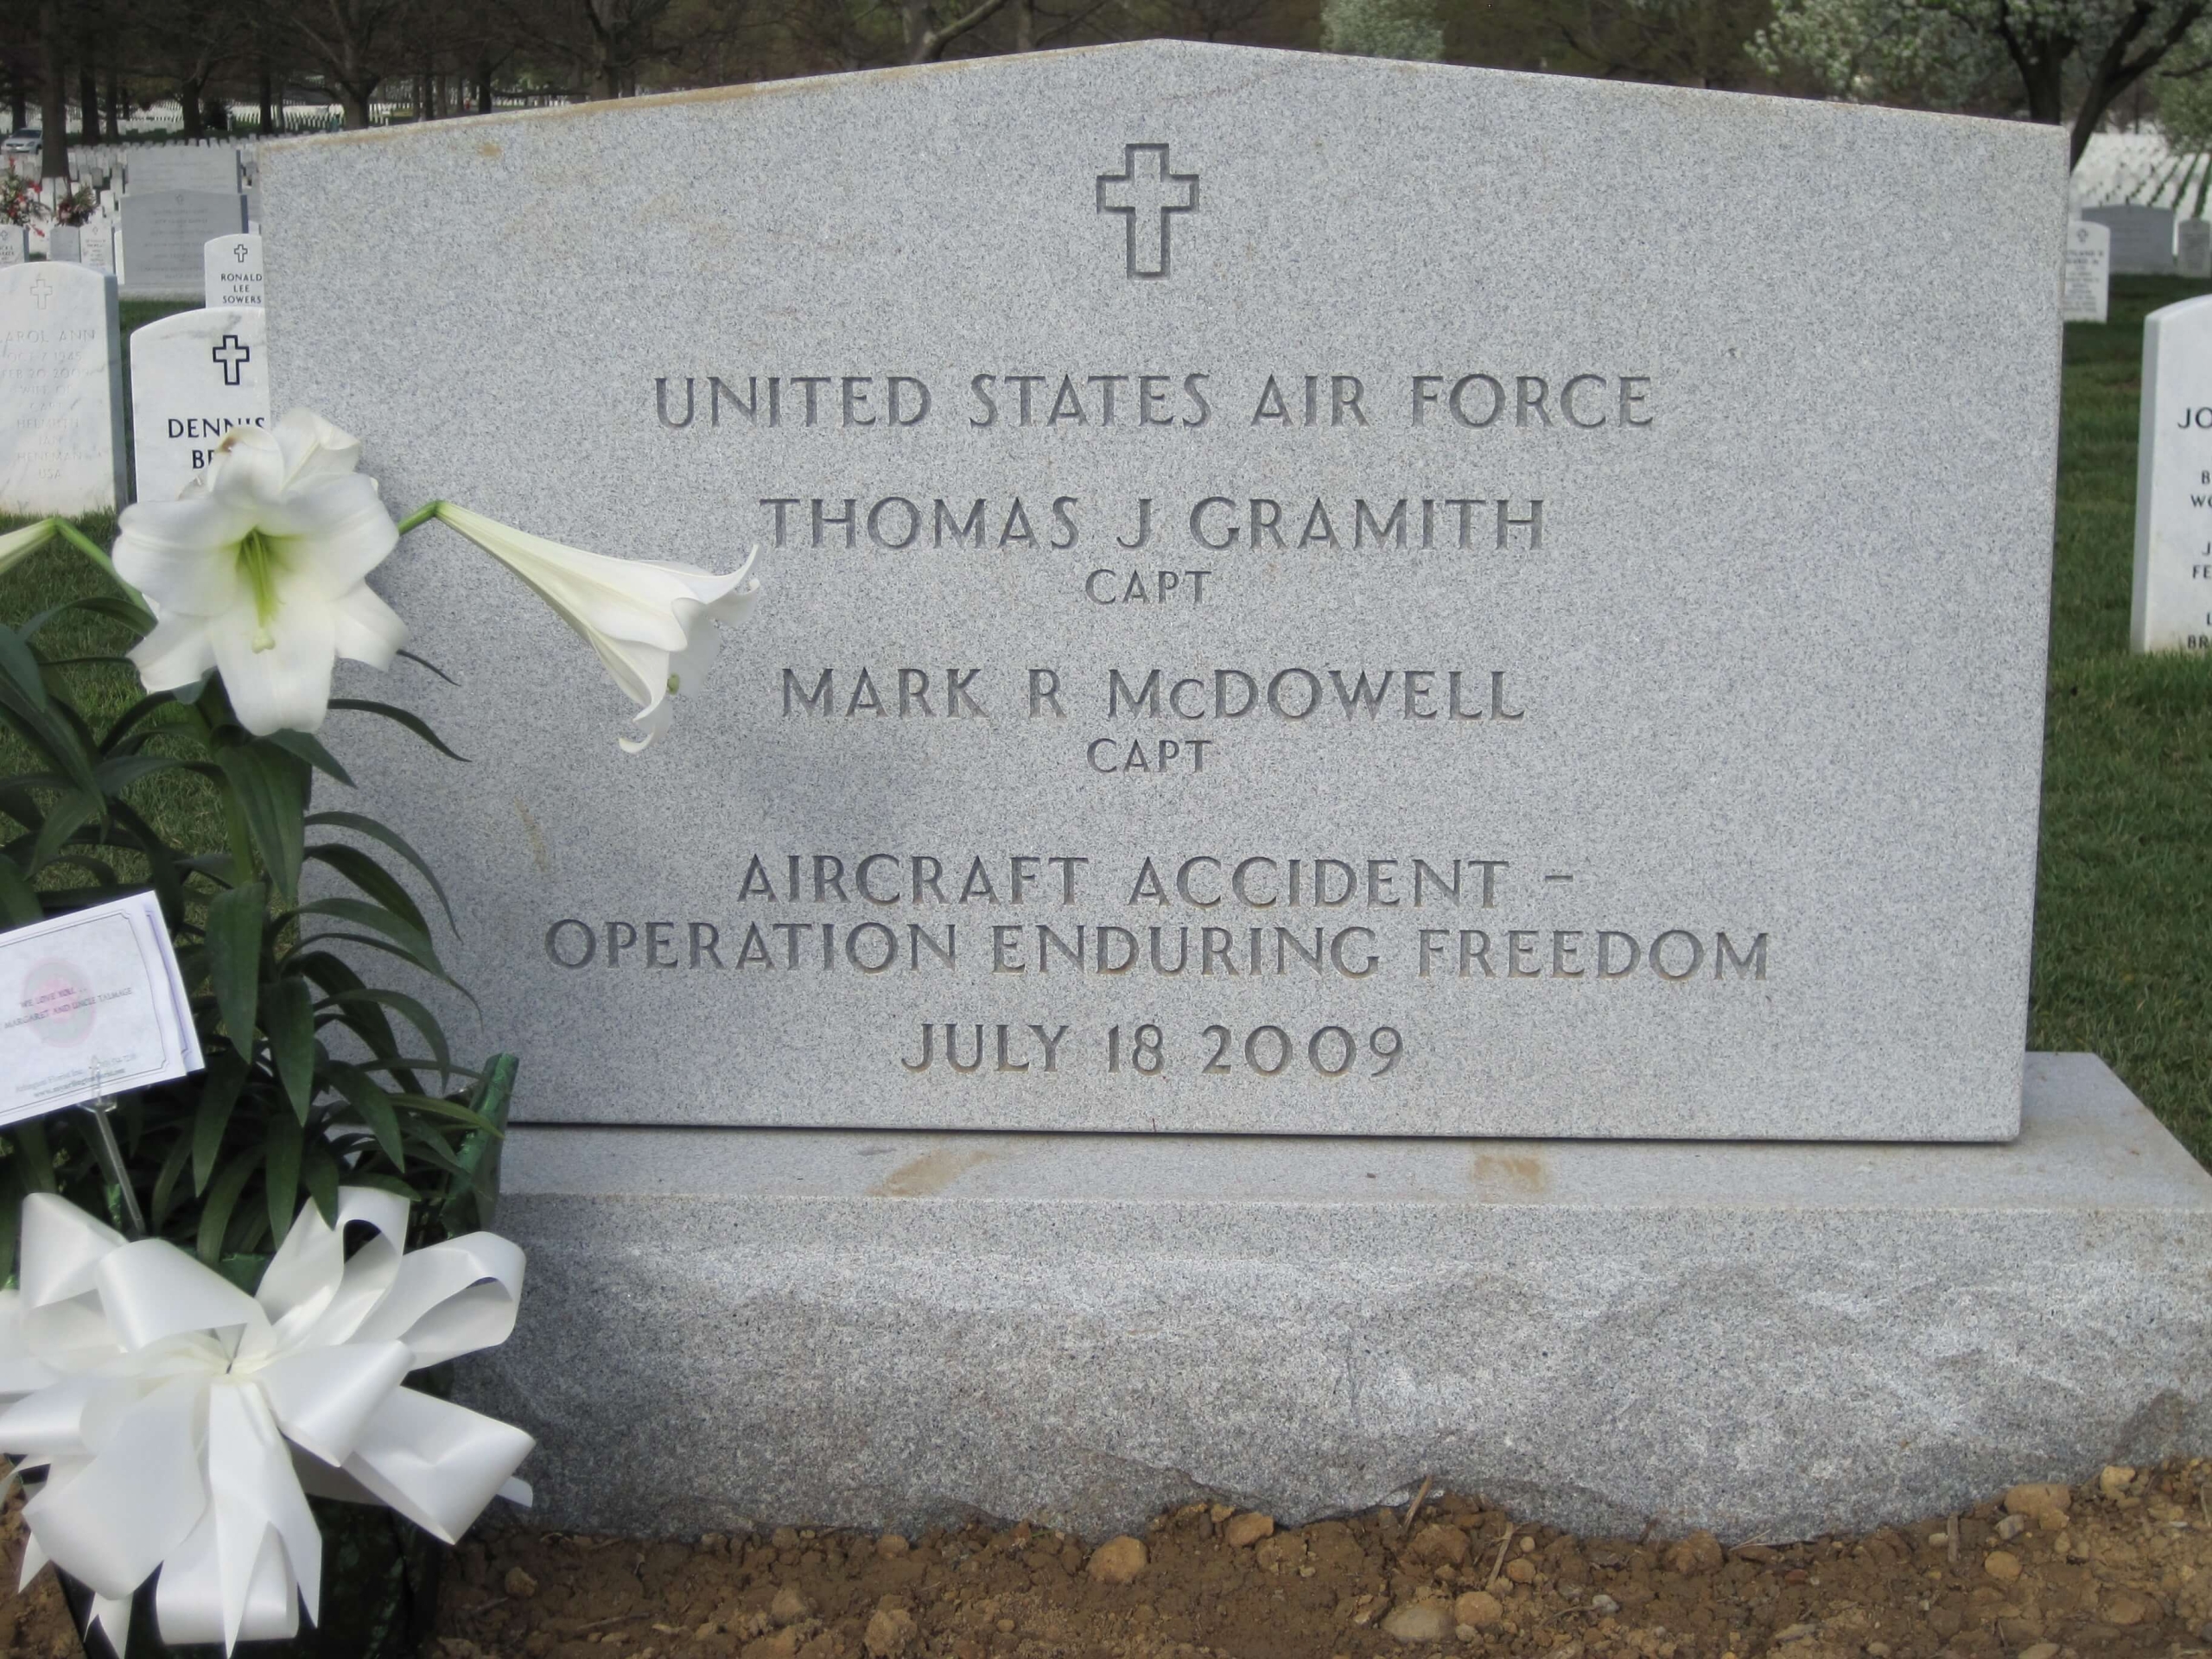 tjgramith-gravesite-photo-by-eileen-horan-april-2010-001